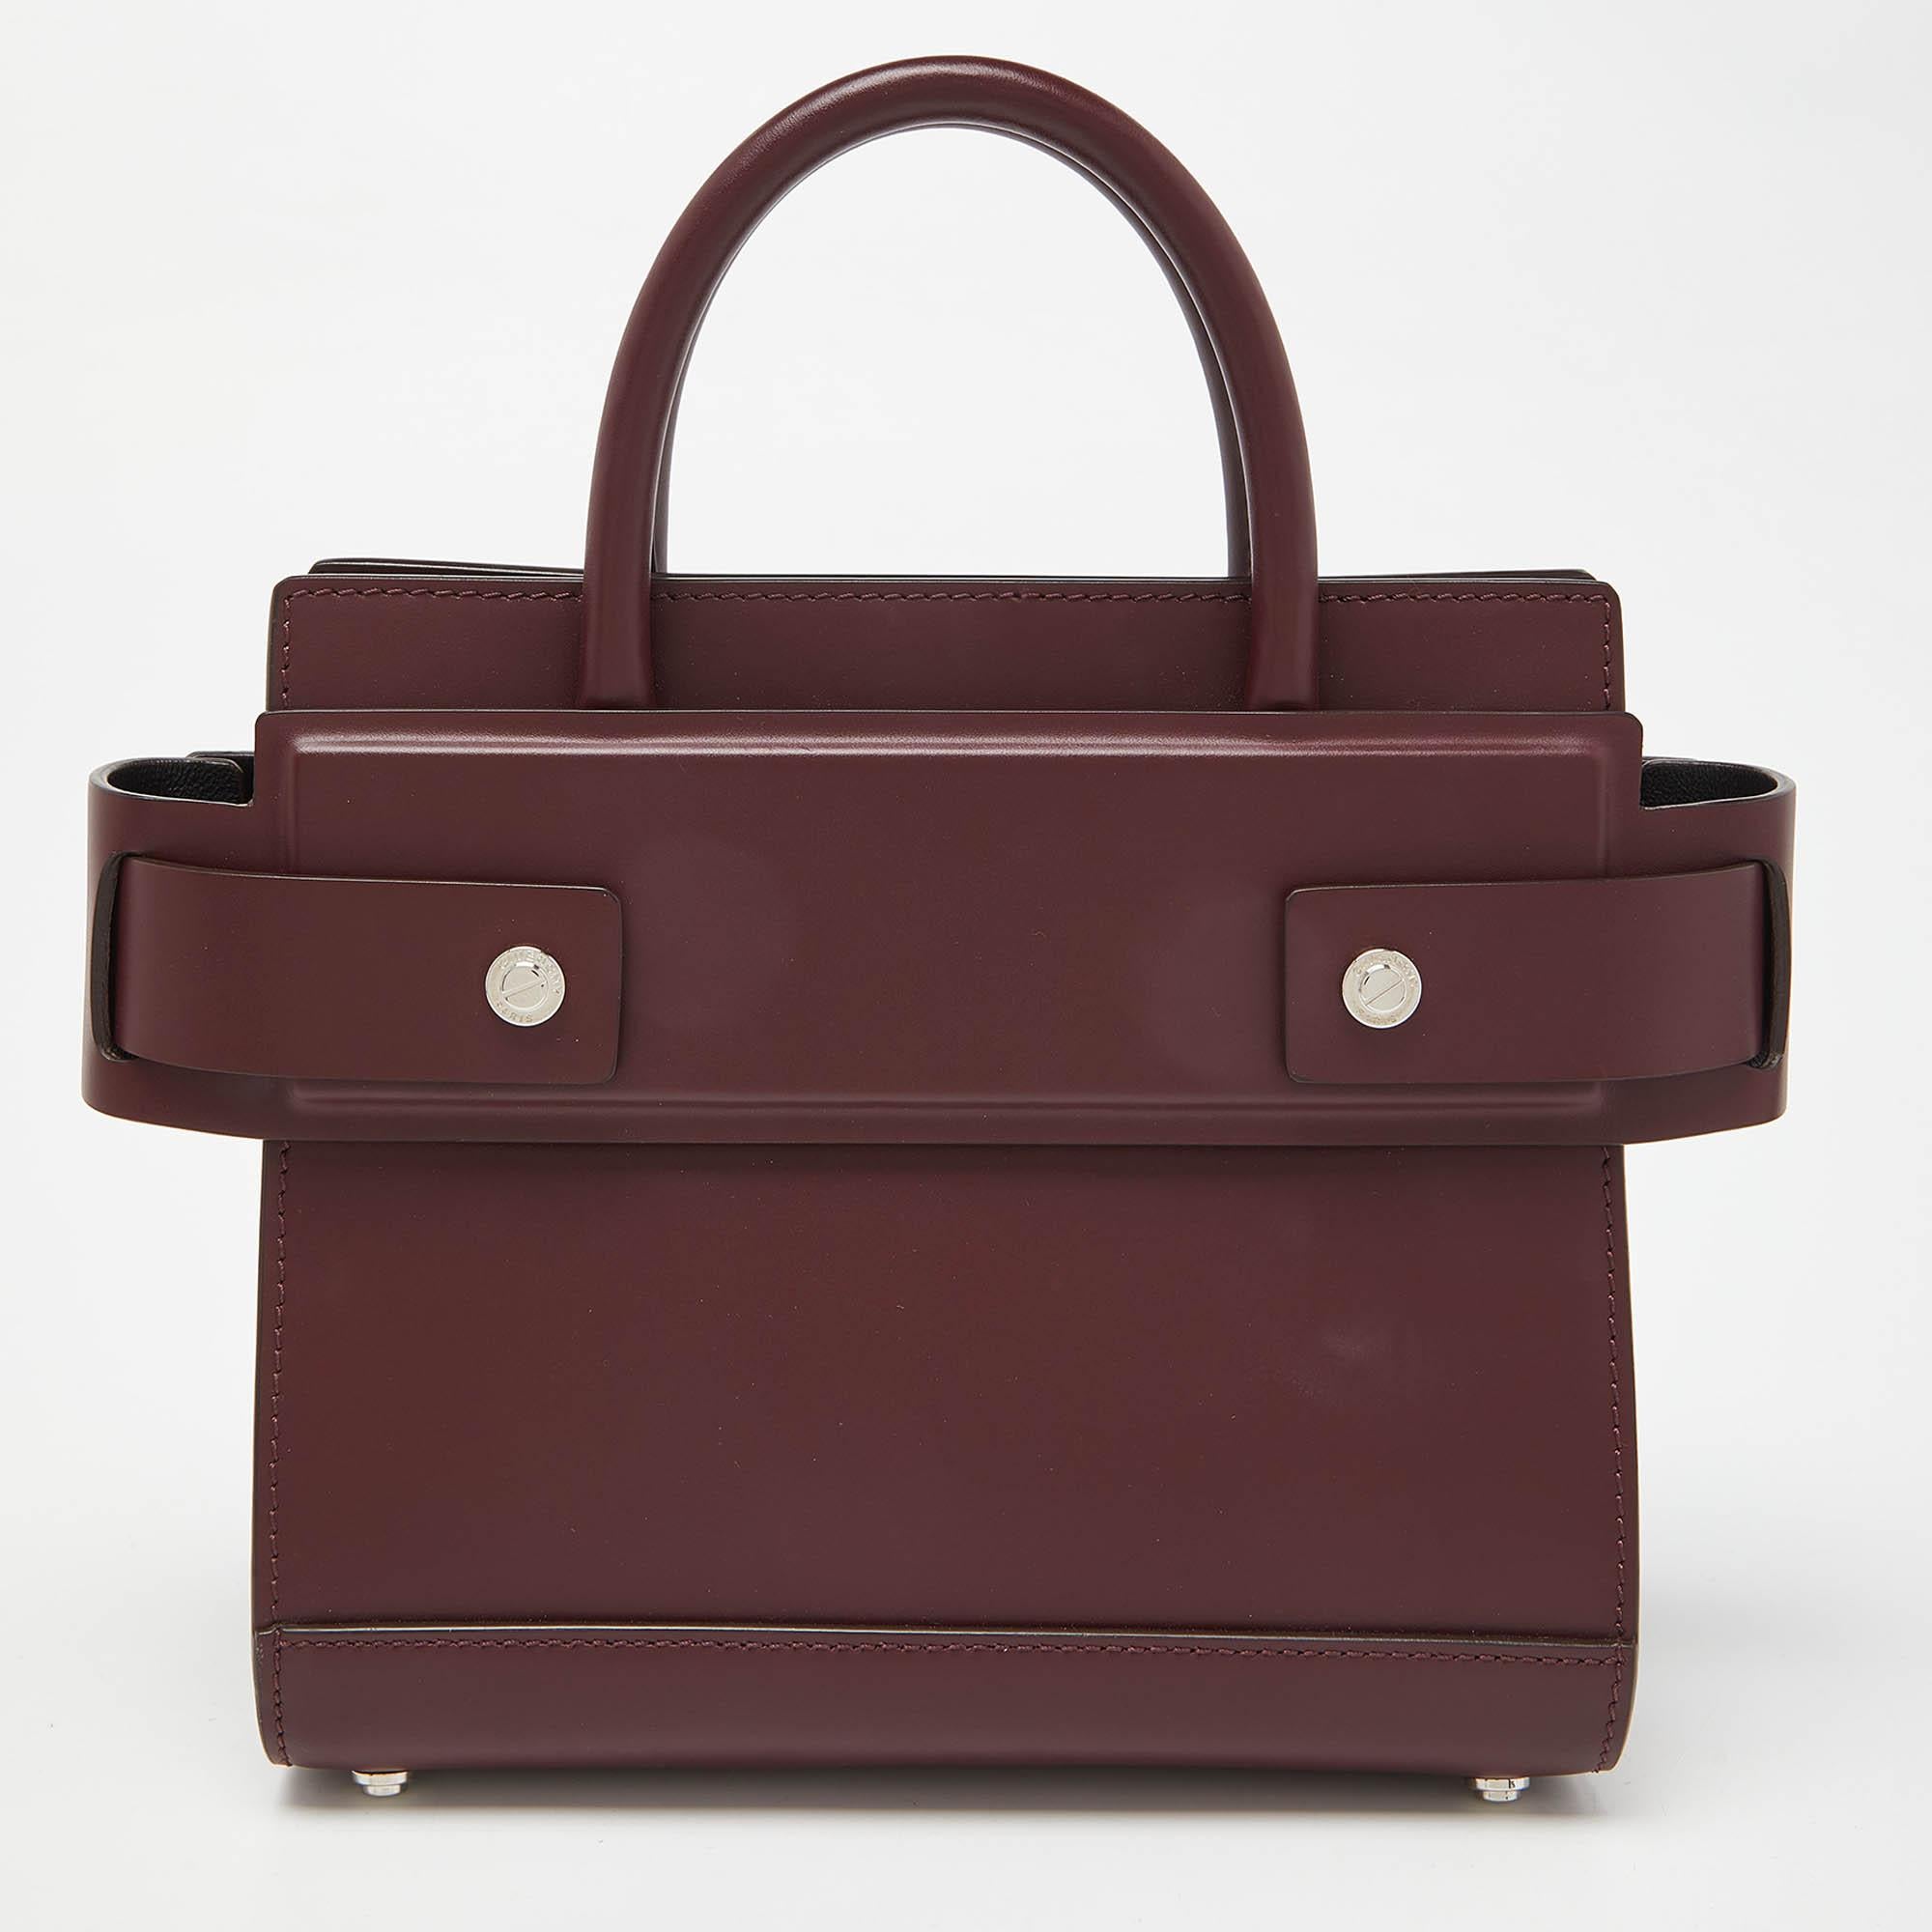 Featuring a leather body, this tote can easily be styled with both formal and informal looks. The luxurious and sturdy handbag by Givenchy will surely meet all your expectations. The burgundy hue gives a classic look and a sleek finishing touch. It